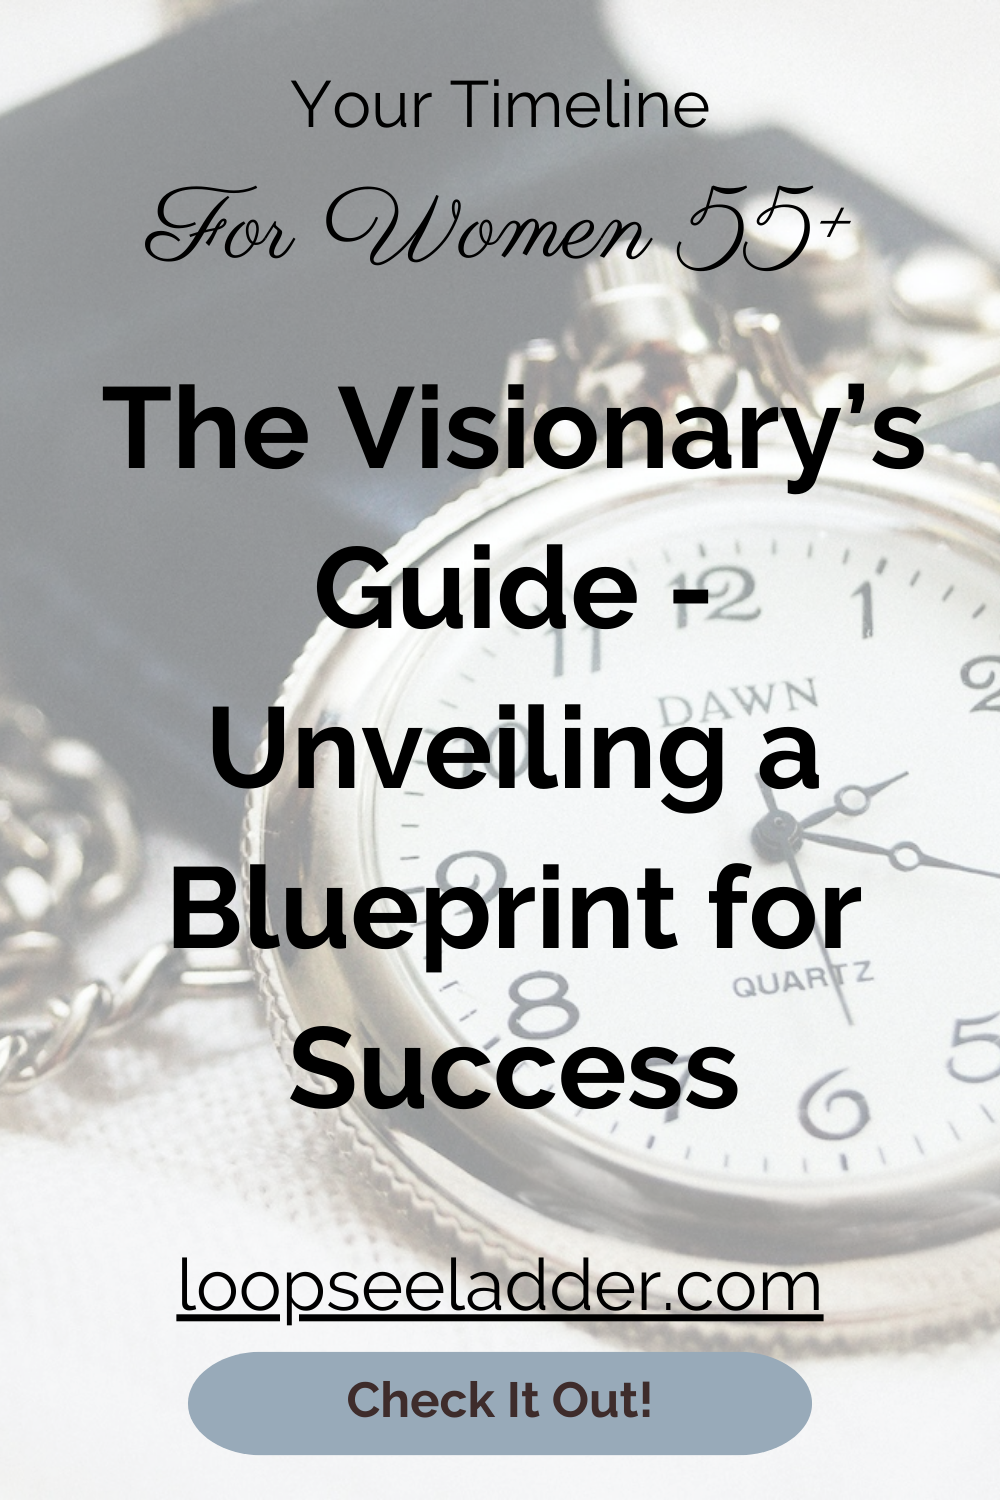 The Visionary's Guide: Unveiling the Blueprint for Success for Women 55+